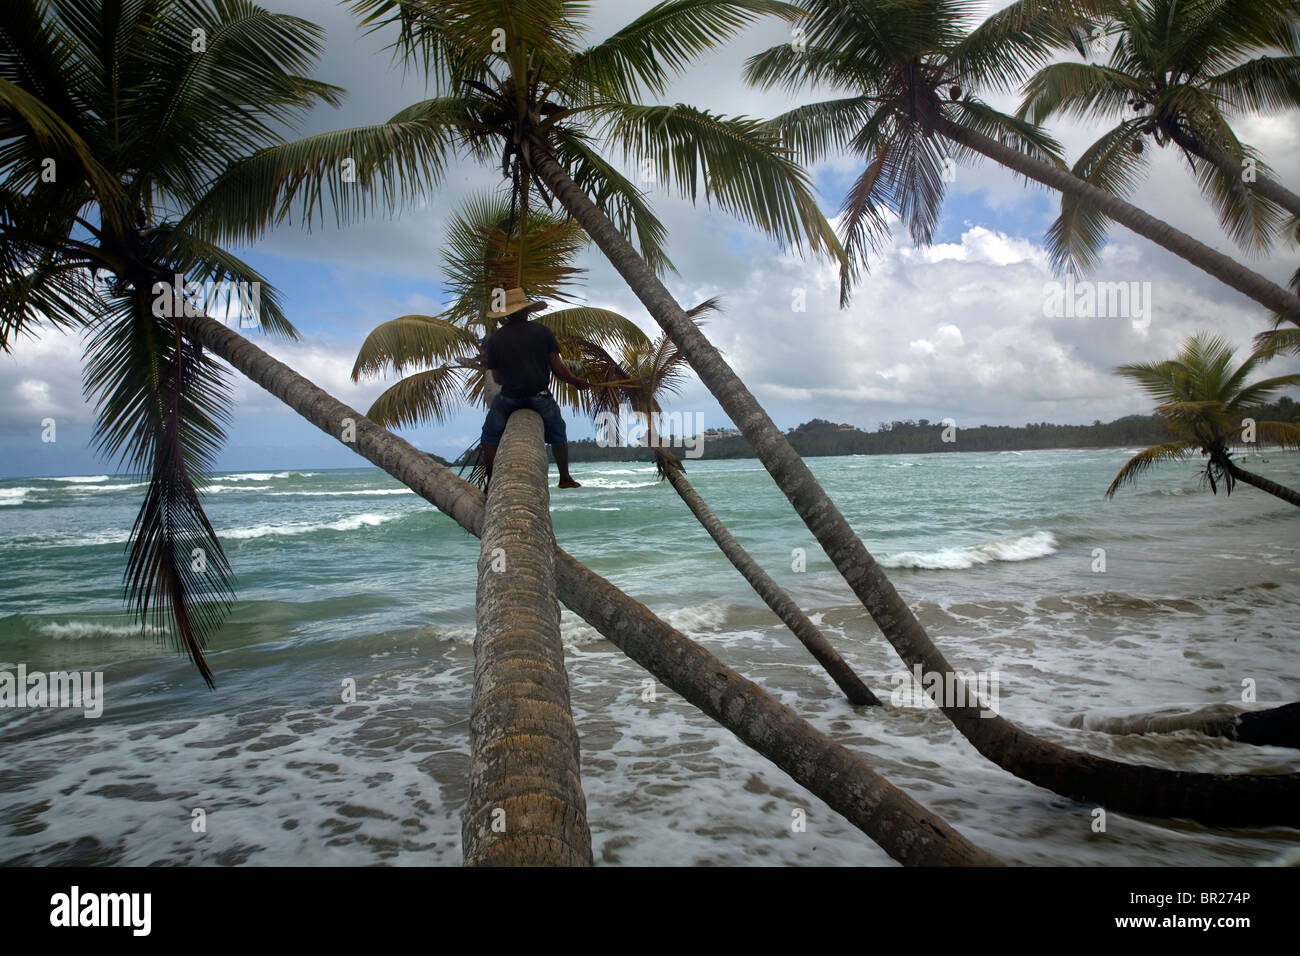 A man rests in a palm tree overlooking the ocean Stock Photo